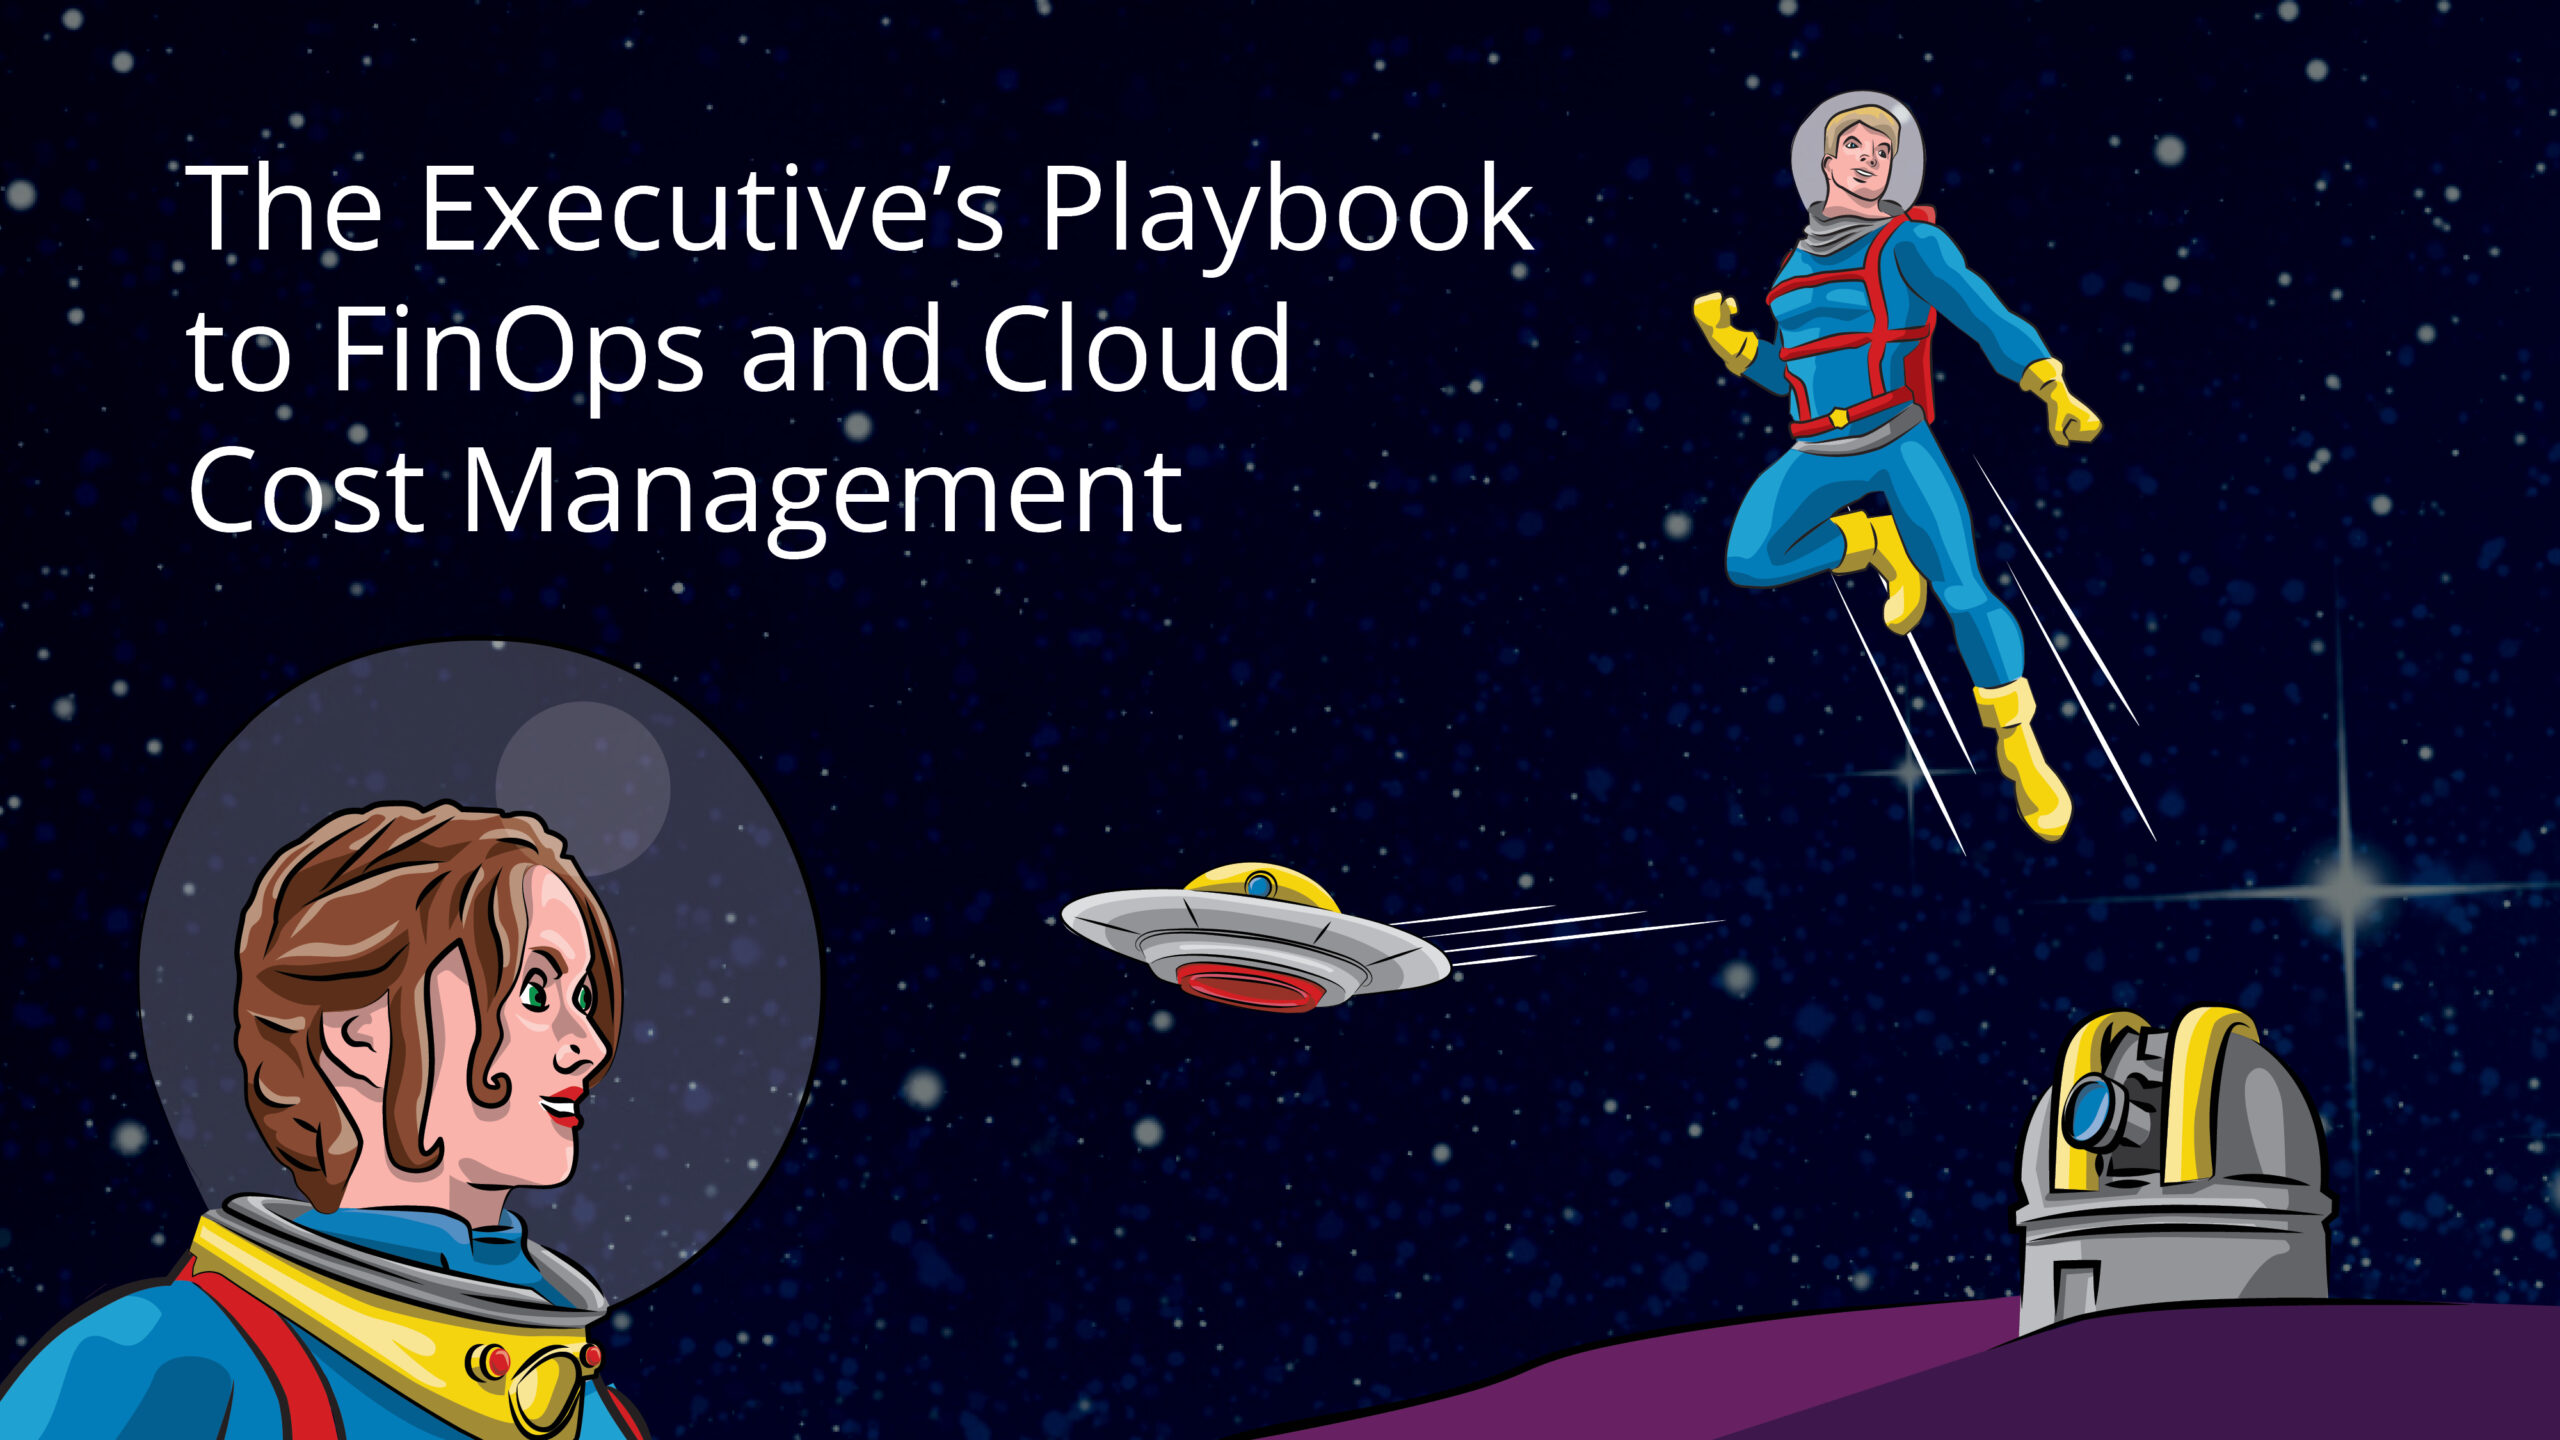 Executive’s Playbook is Timely for Business Challenges